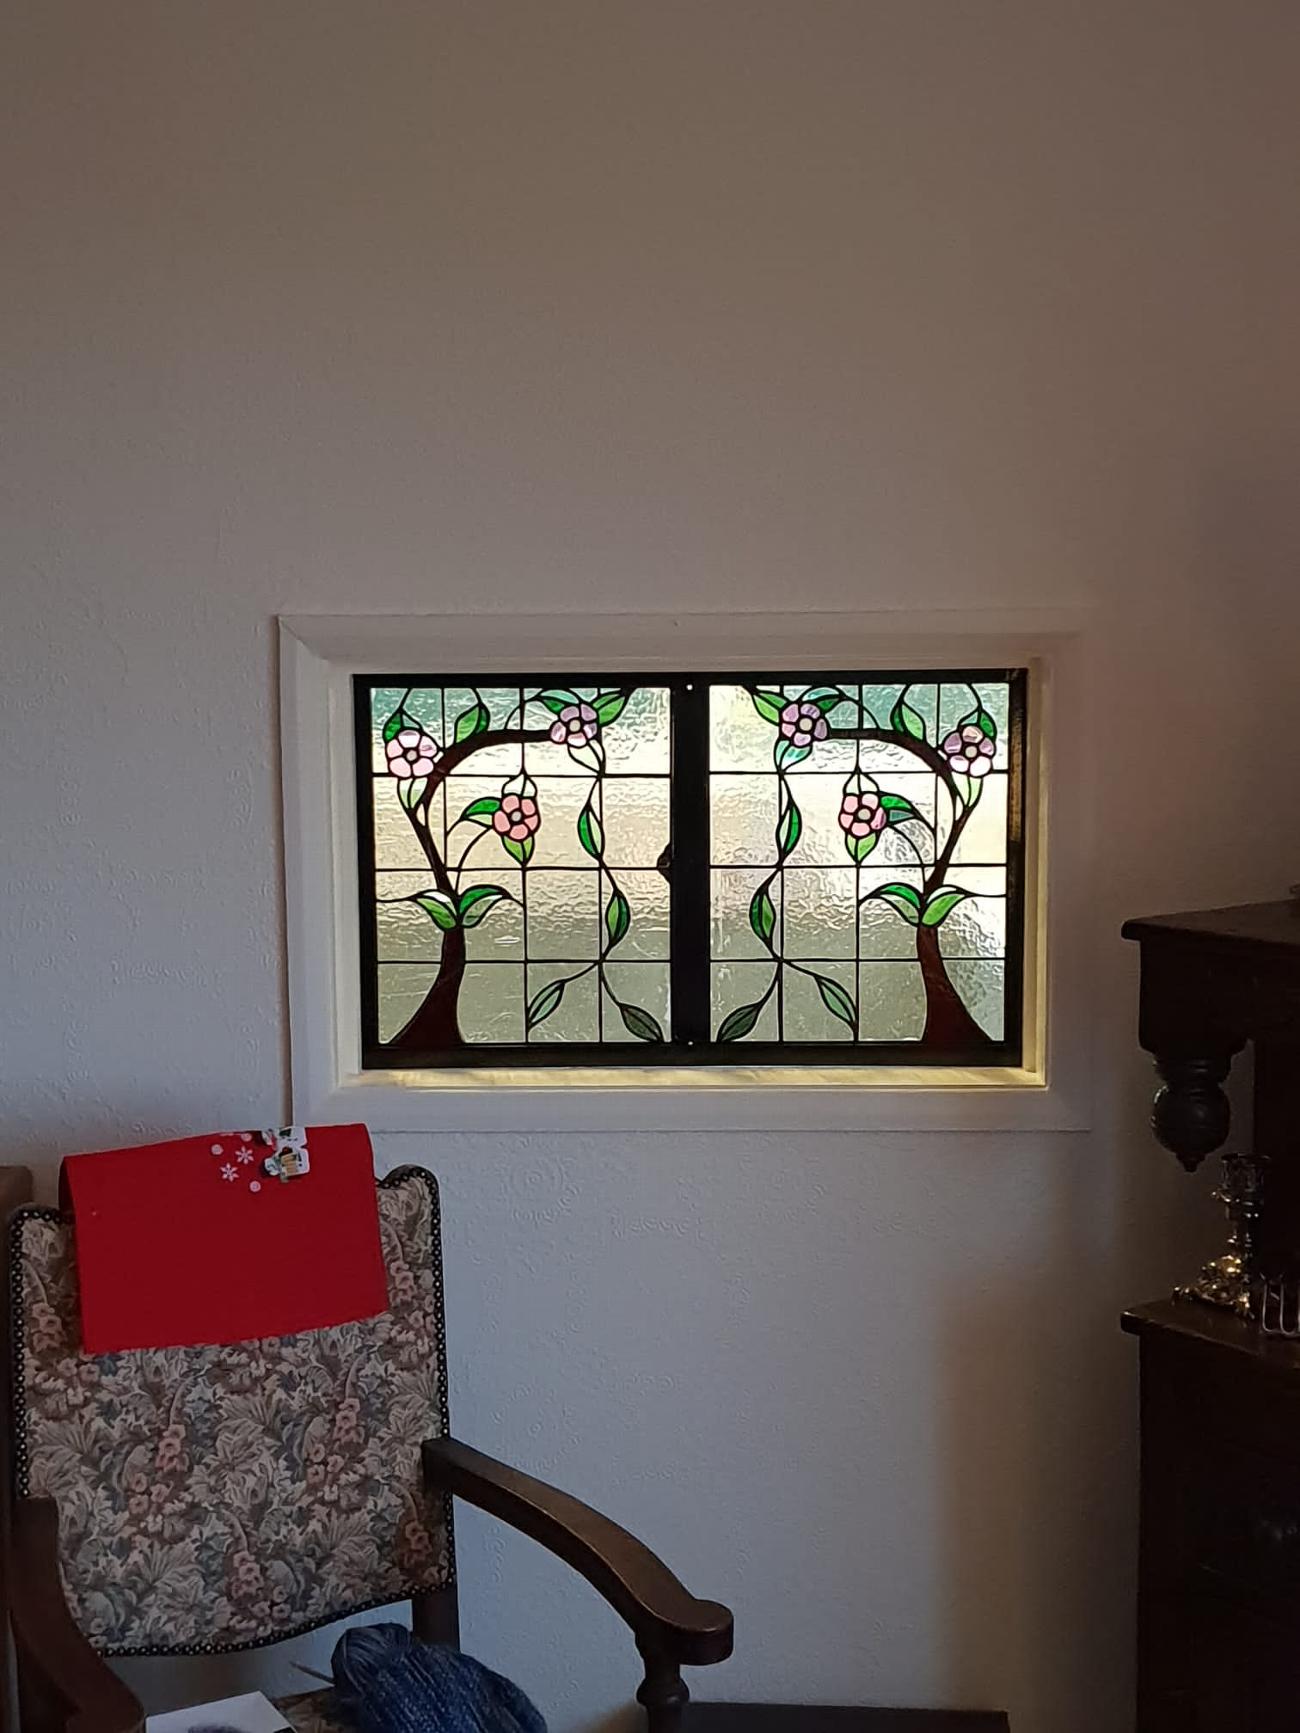 Church Stained Glass Repair | Harland and Co gallery image 14